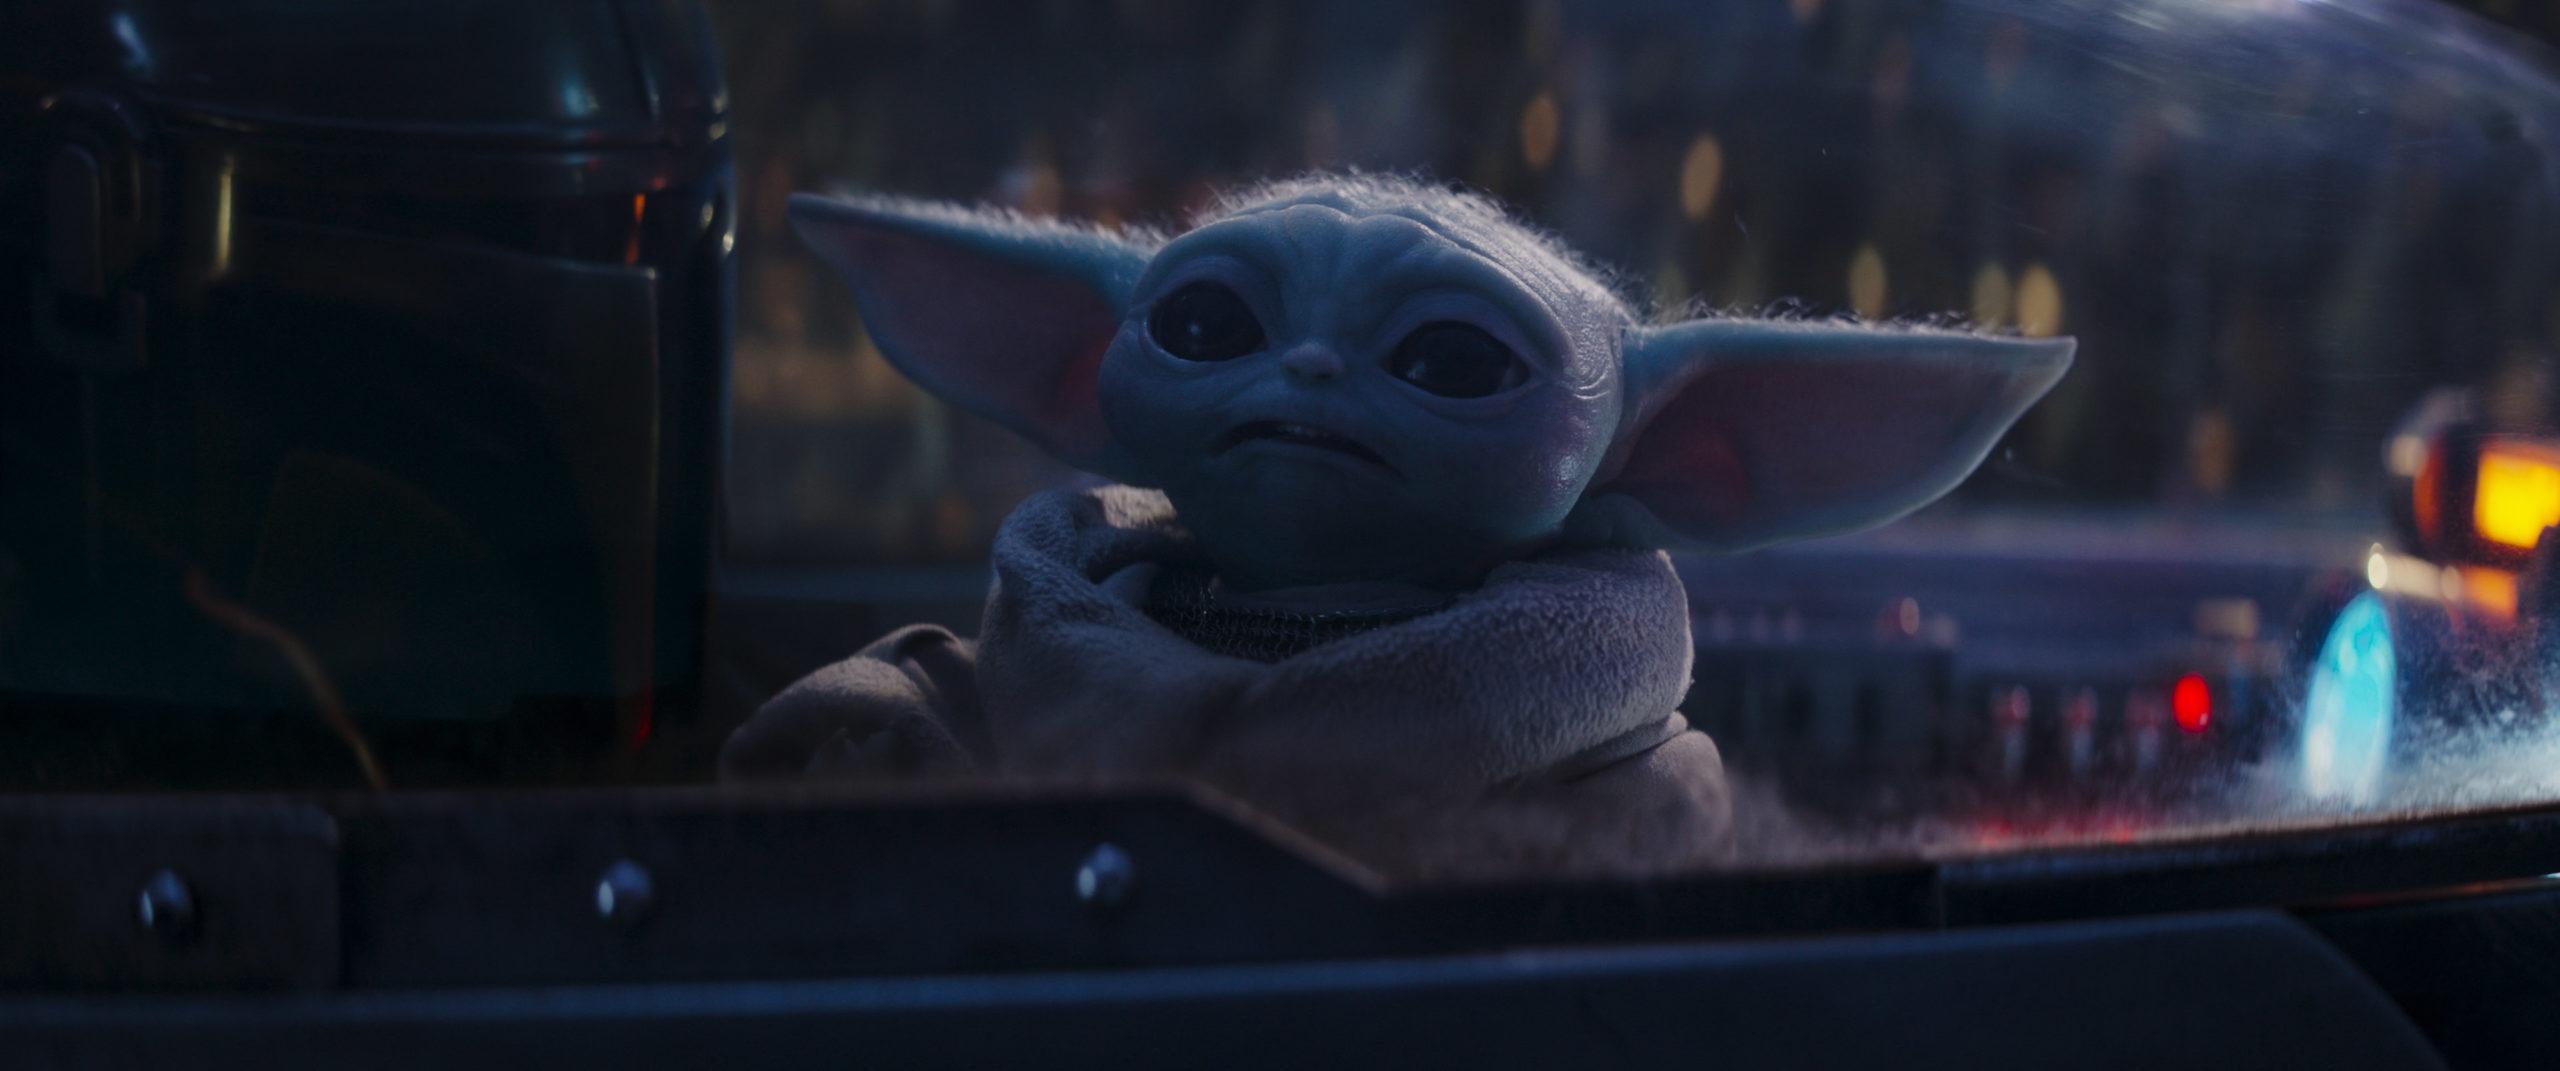 Dave Filoni Says Grogu Will Talk Sooner Rather Than Later